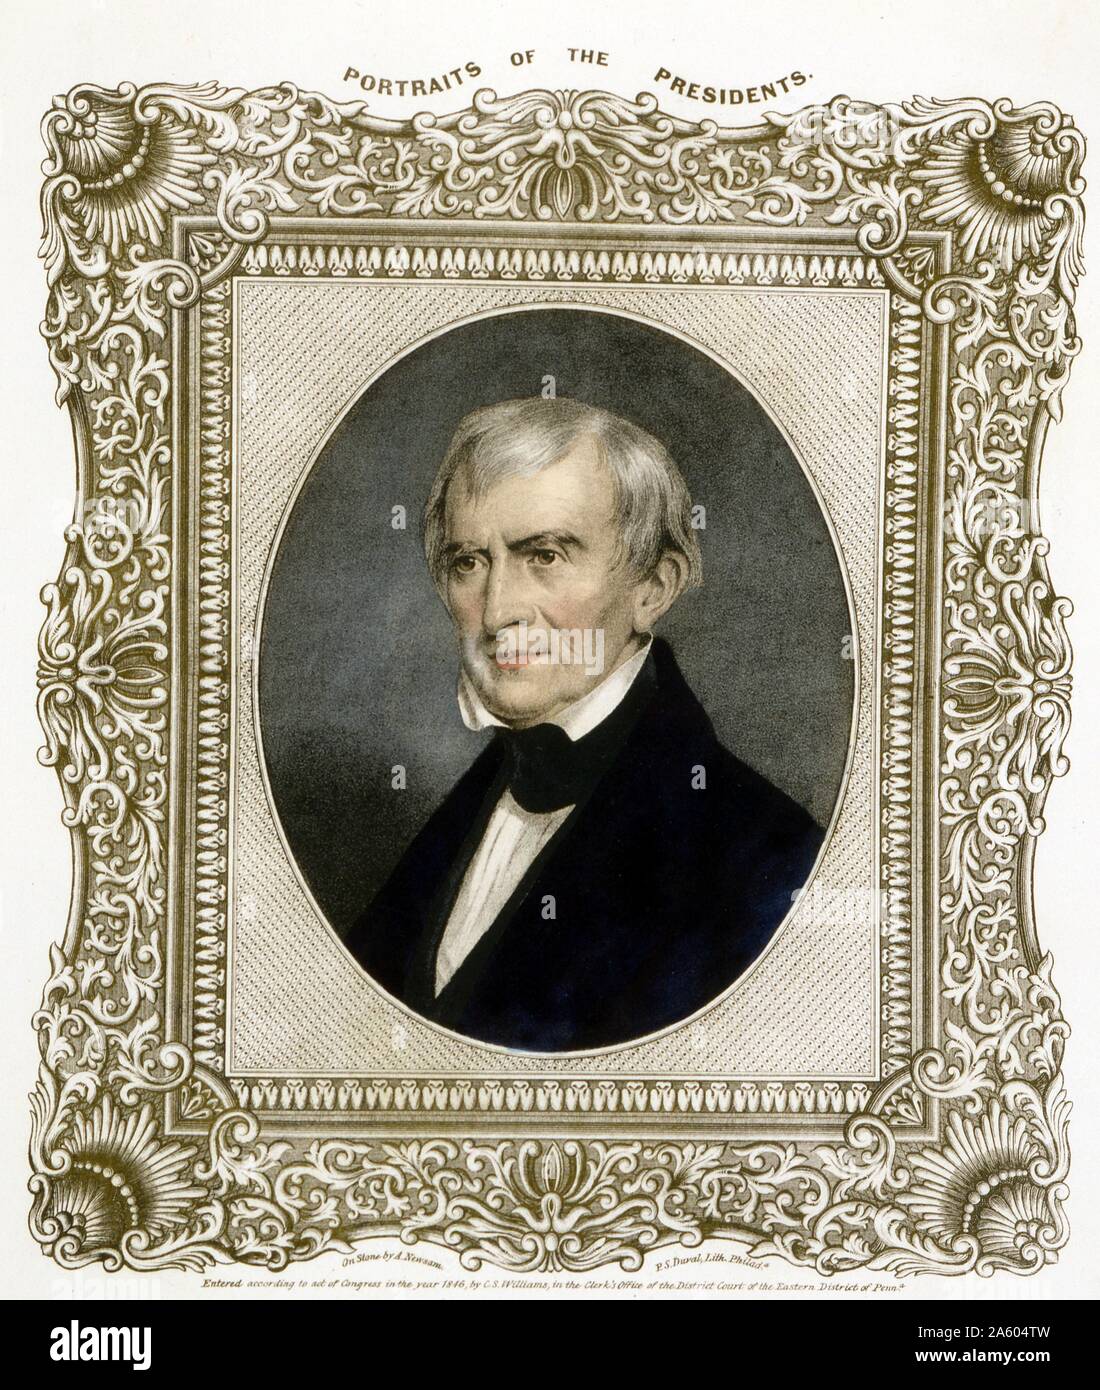 William. H. Harrison the 9th President of the United States was an American military officer and politician, and the first president to die in office. Stock Photo